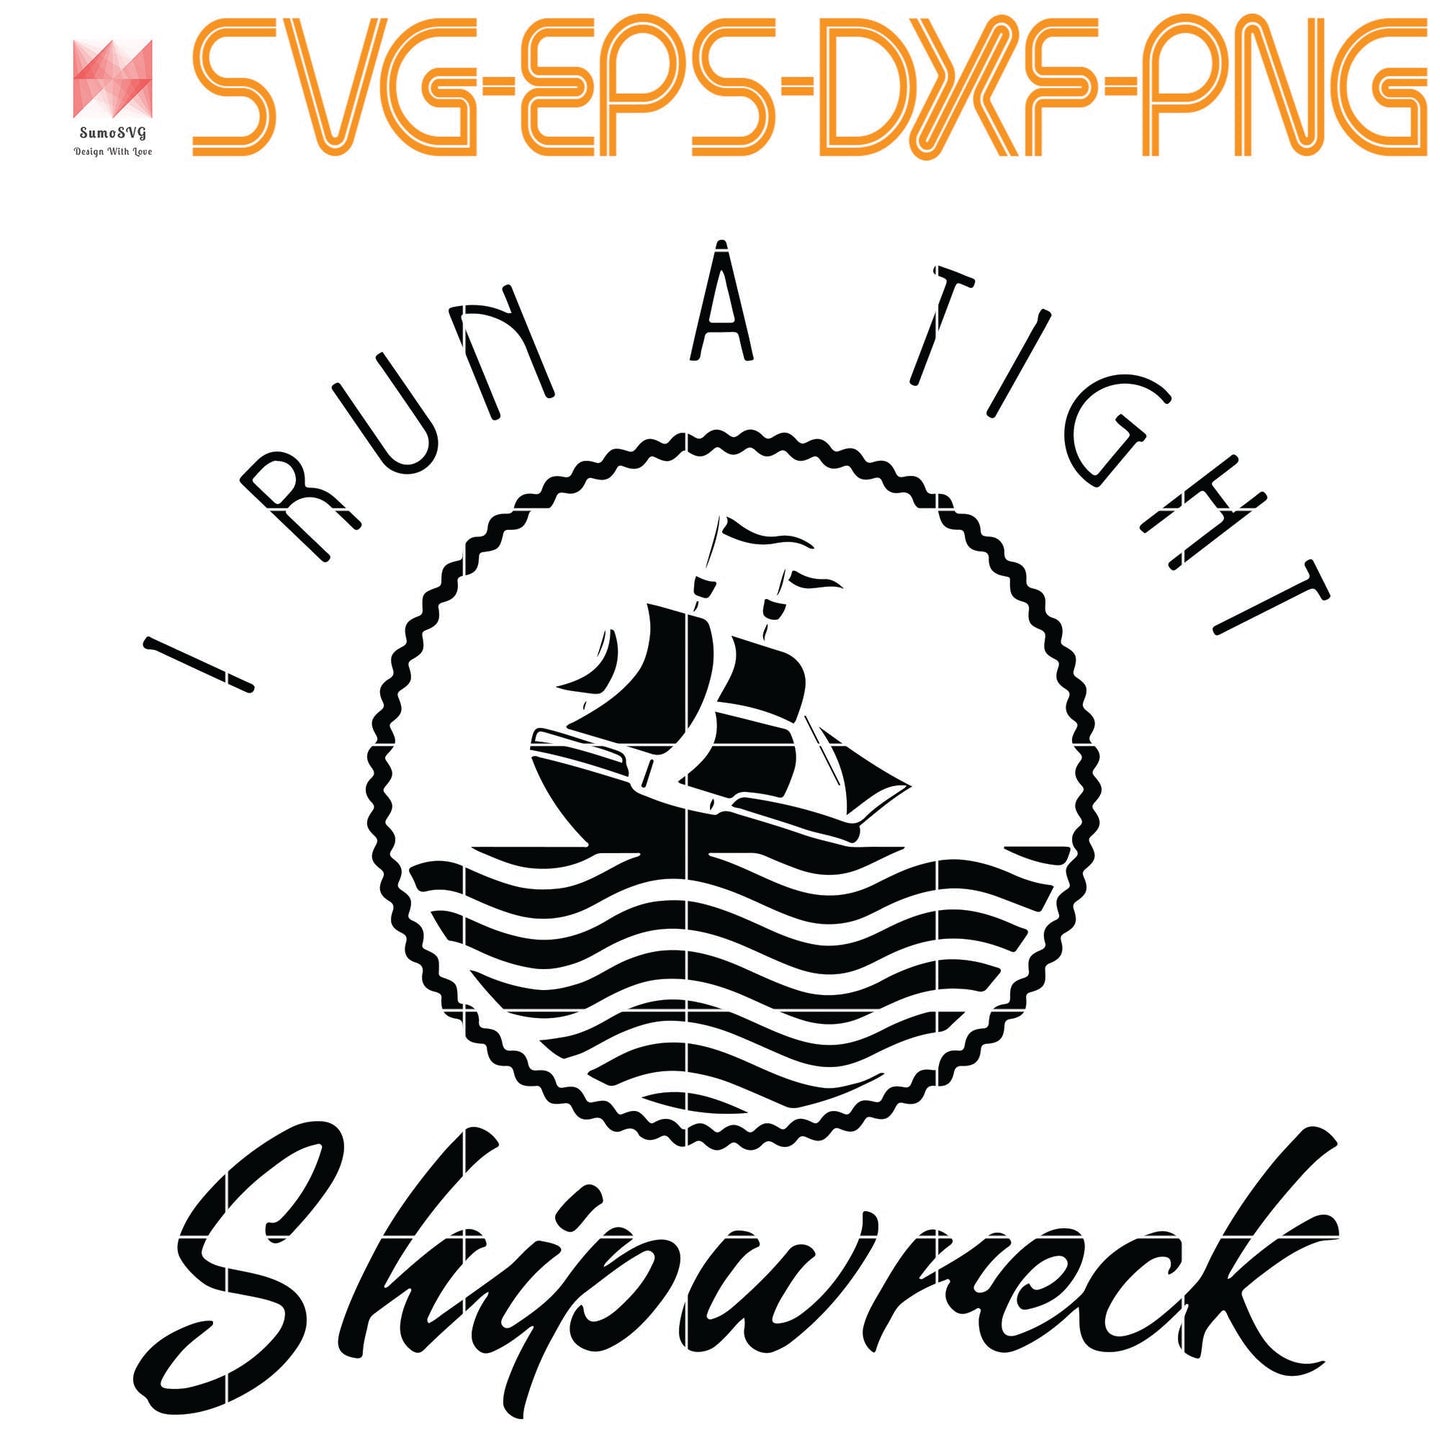 I Run A Tight Shipwreck Funny Vintage, Quotes, PNG, EPS, DXF, Digital Download